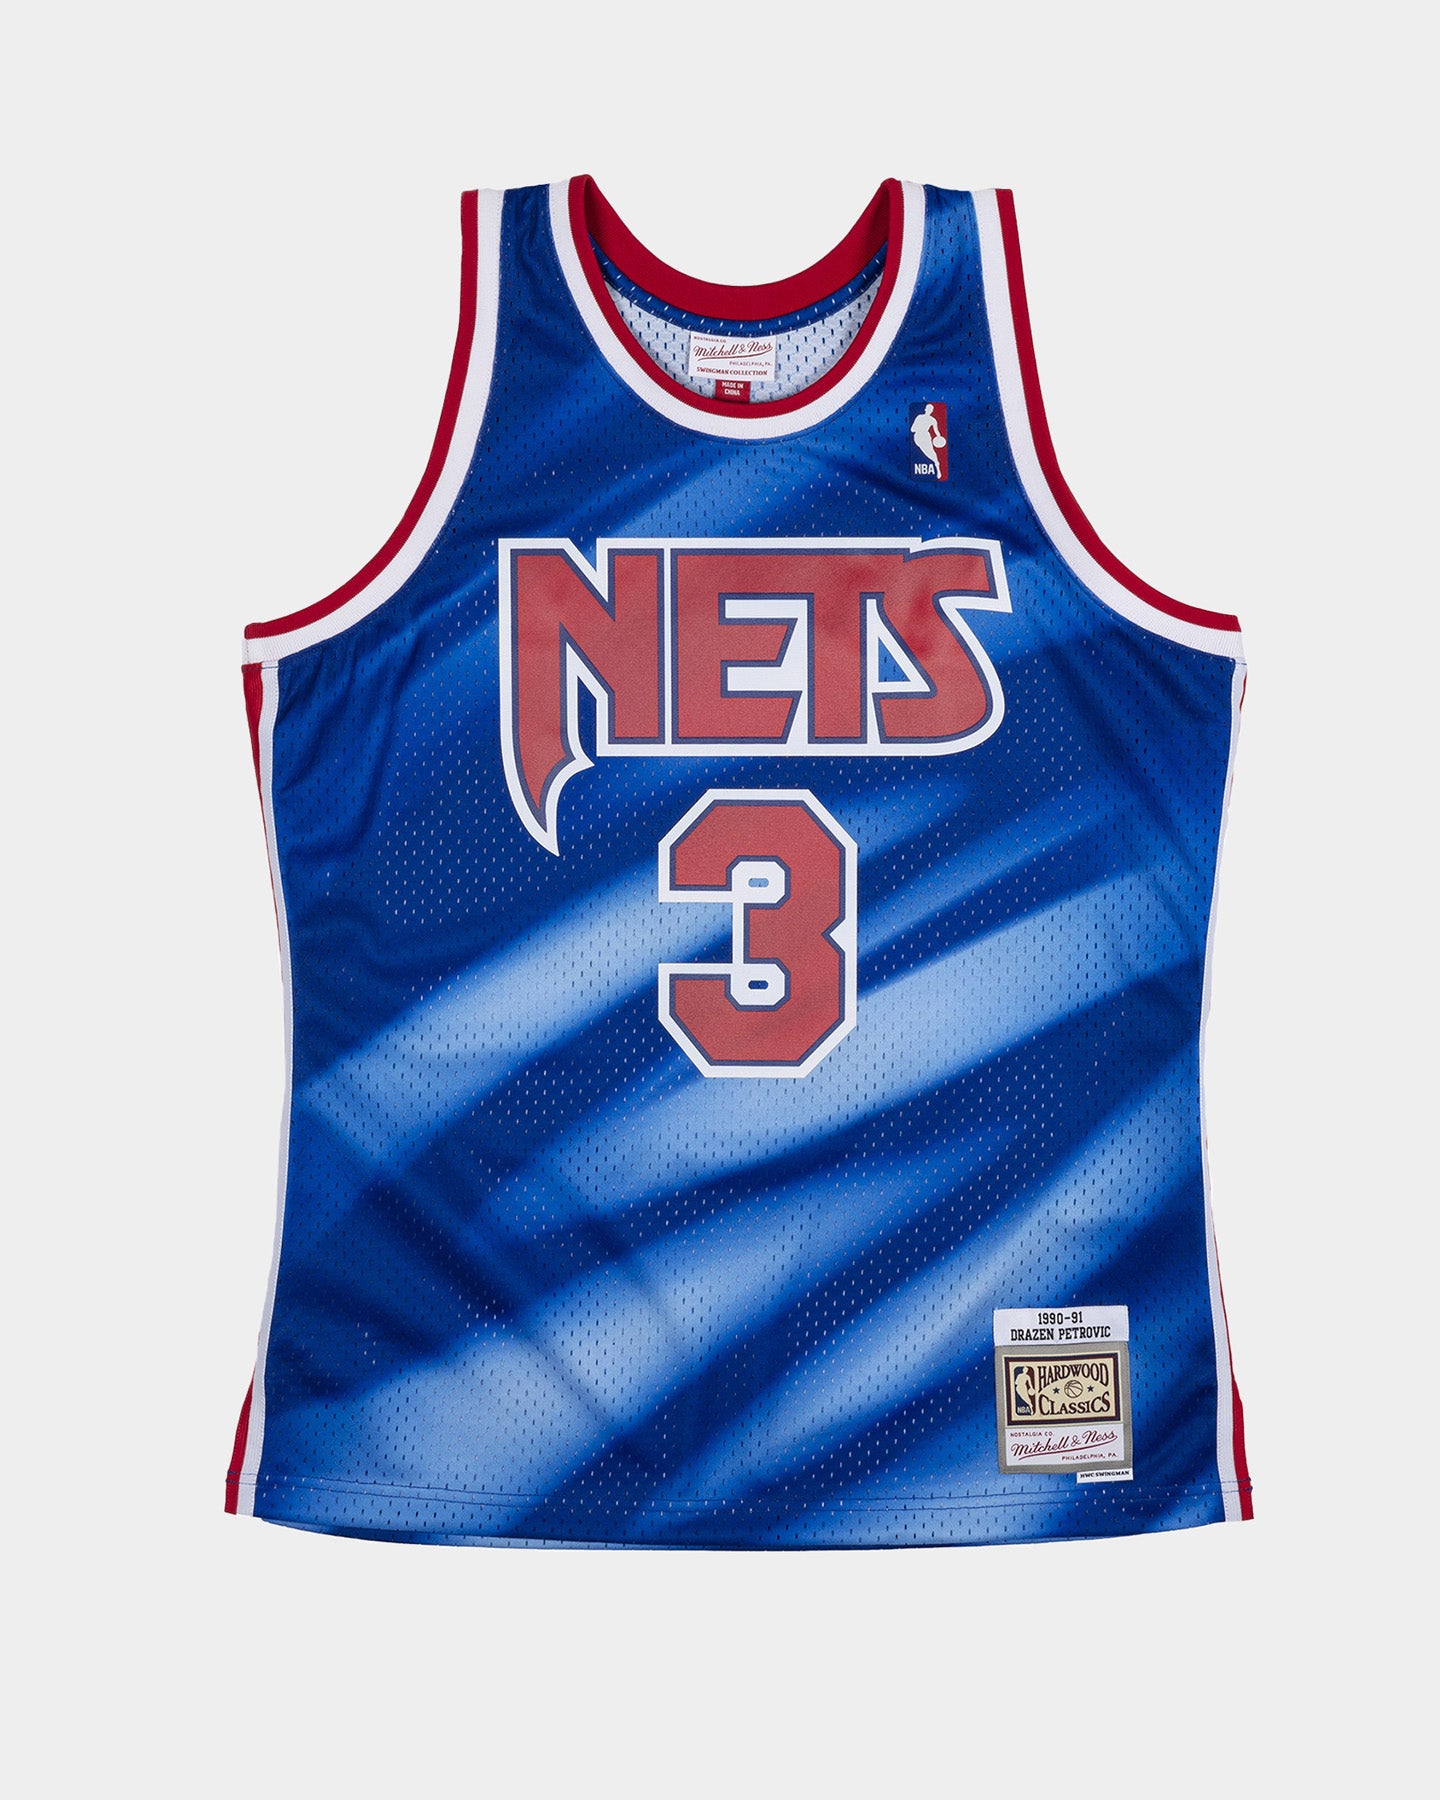 drazen petrovic jersey for sale